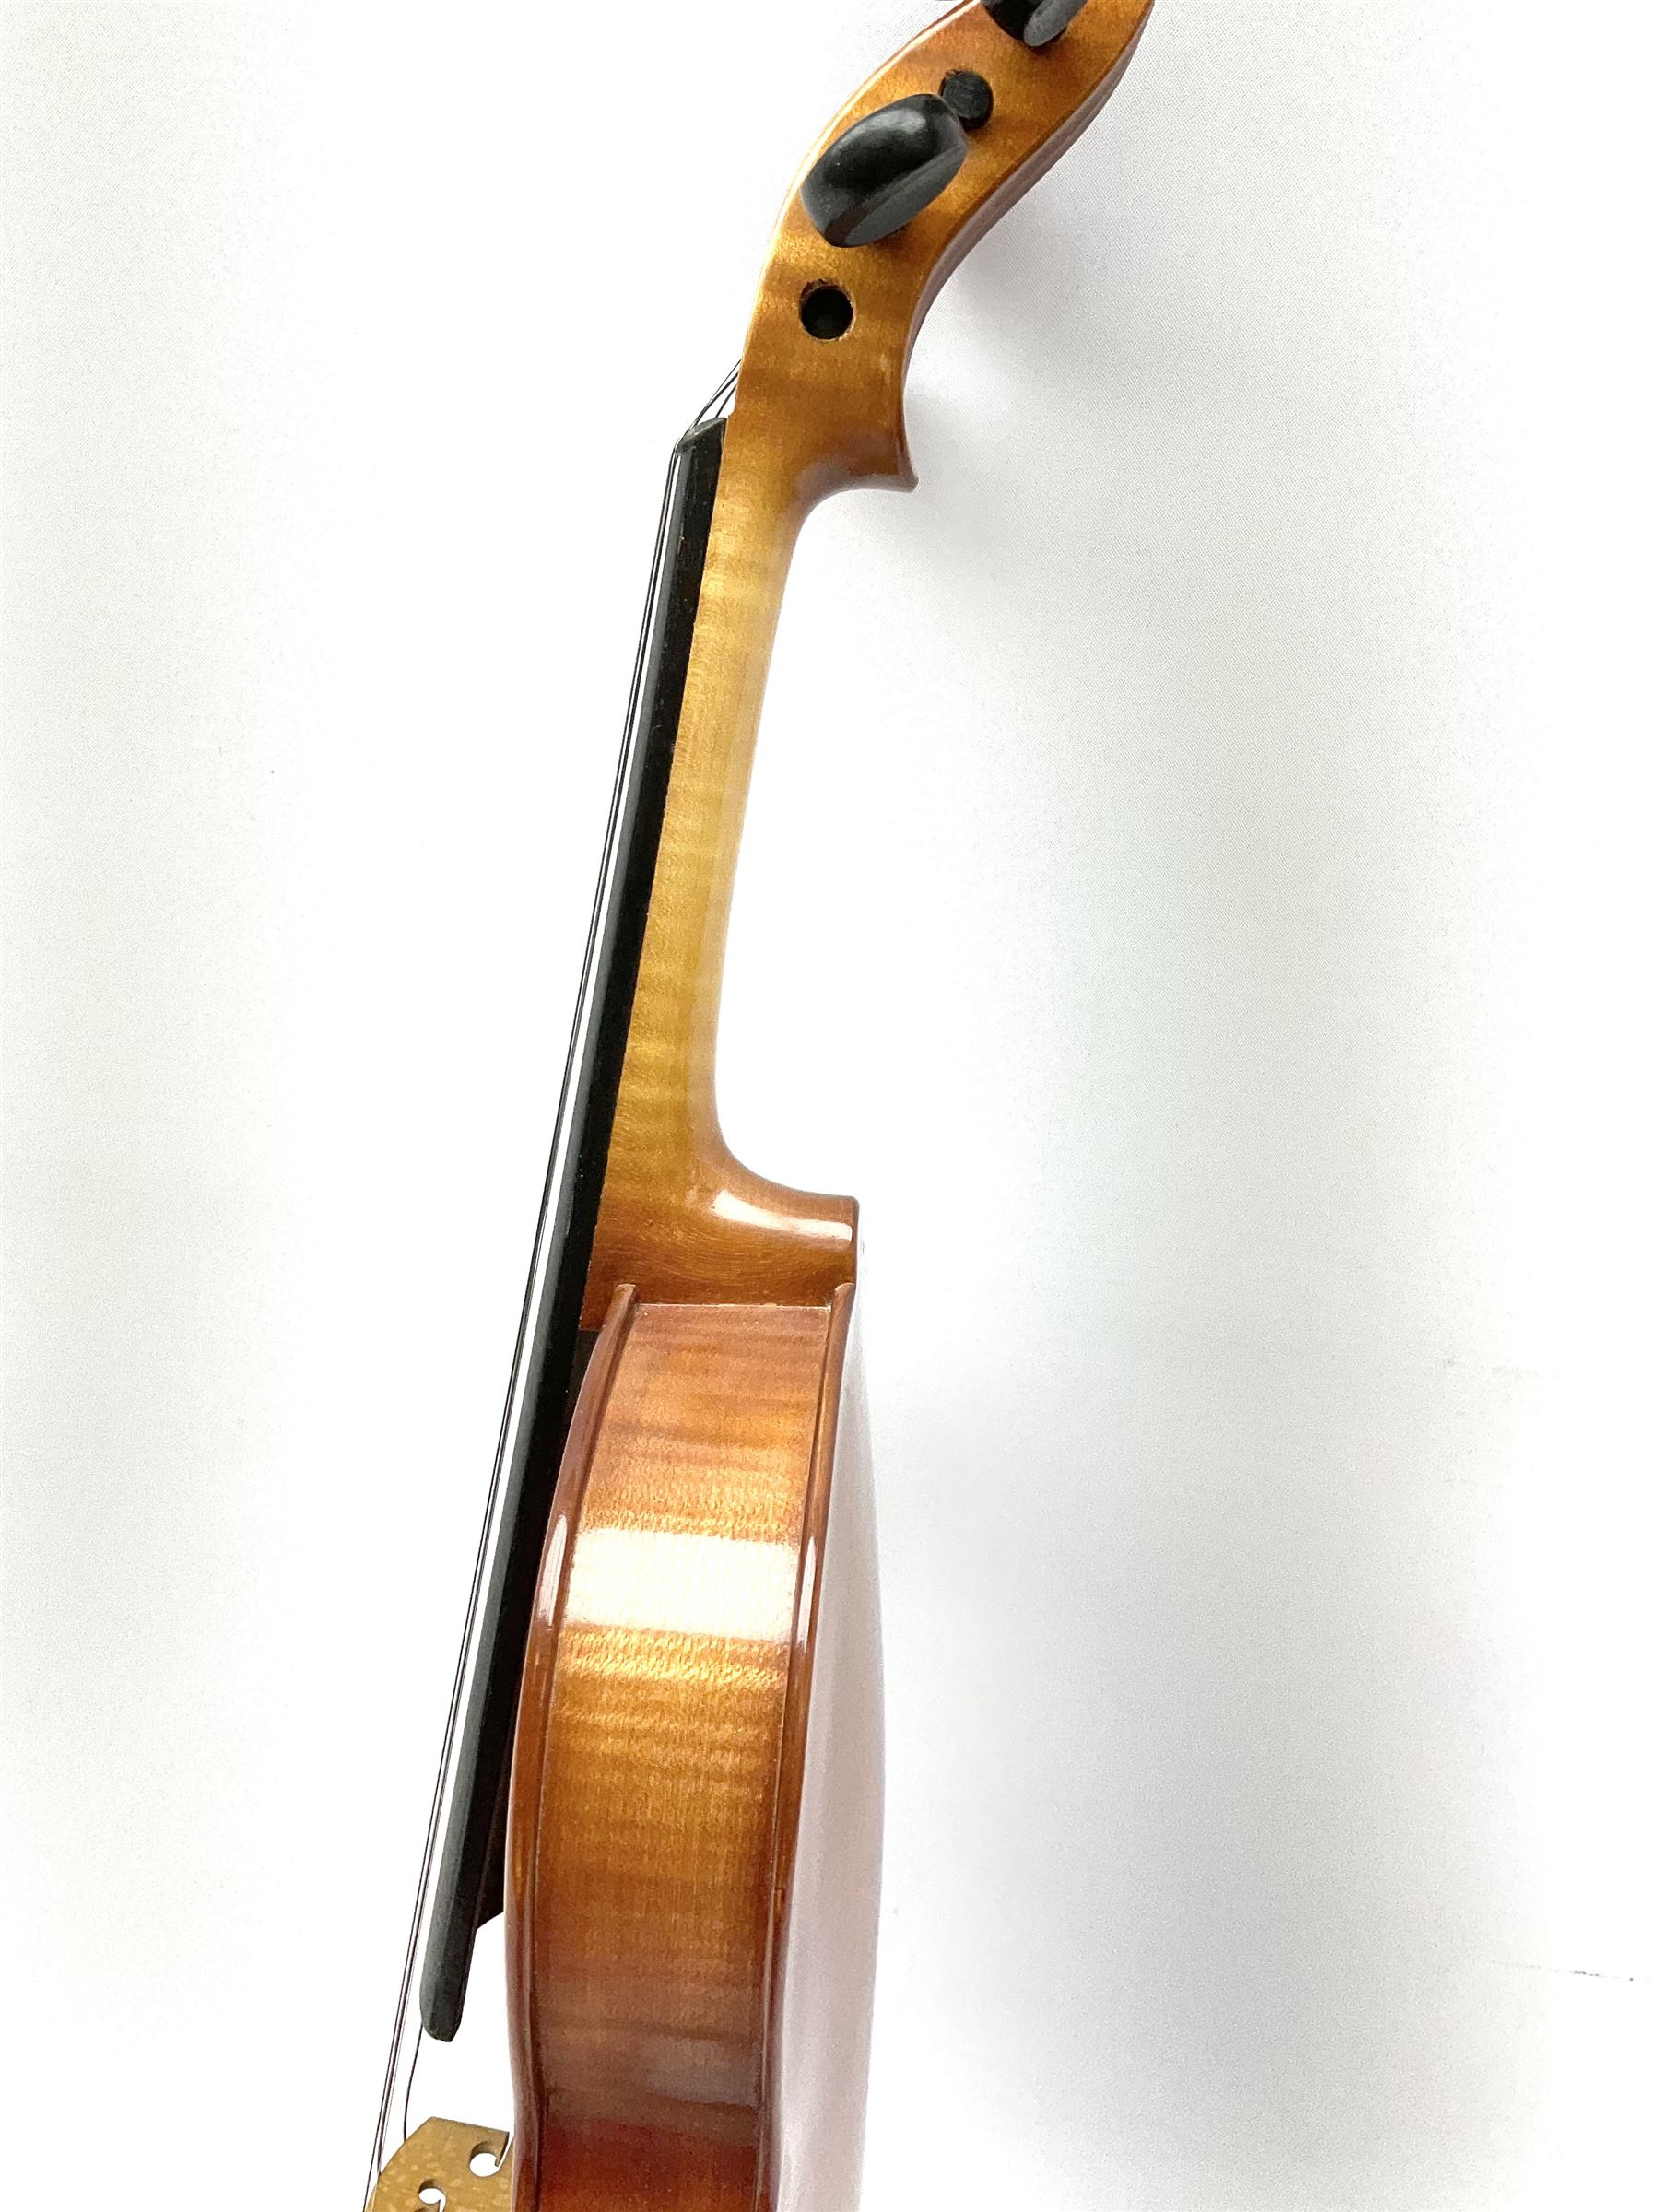 Modern violin with 36cm two-piece maple back and ribs and spruce top 60cm overall - Image 14 of 16